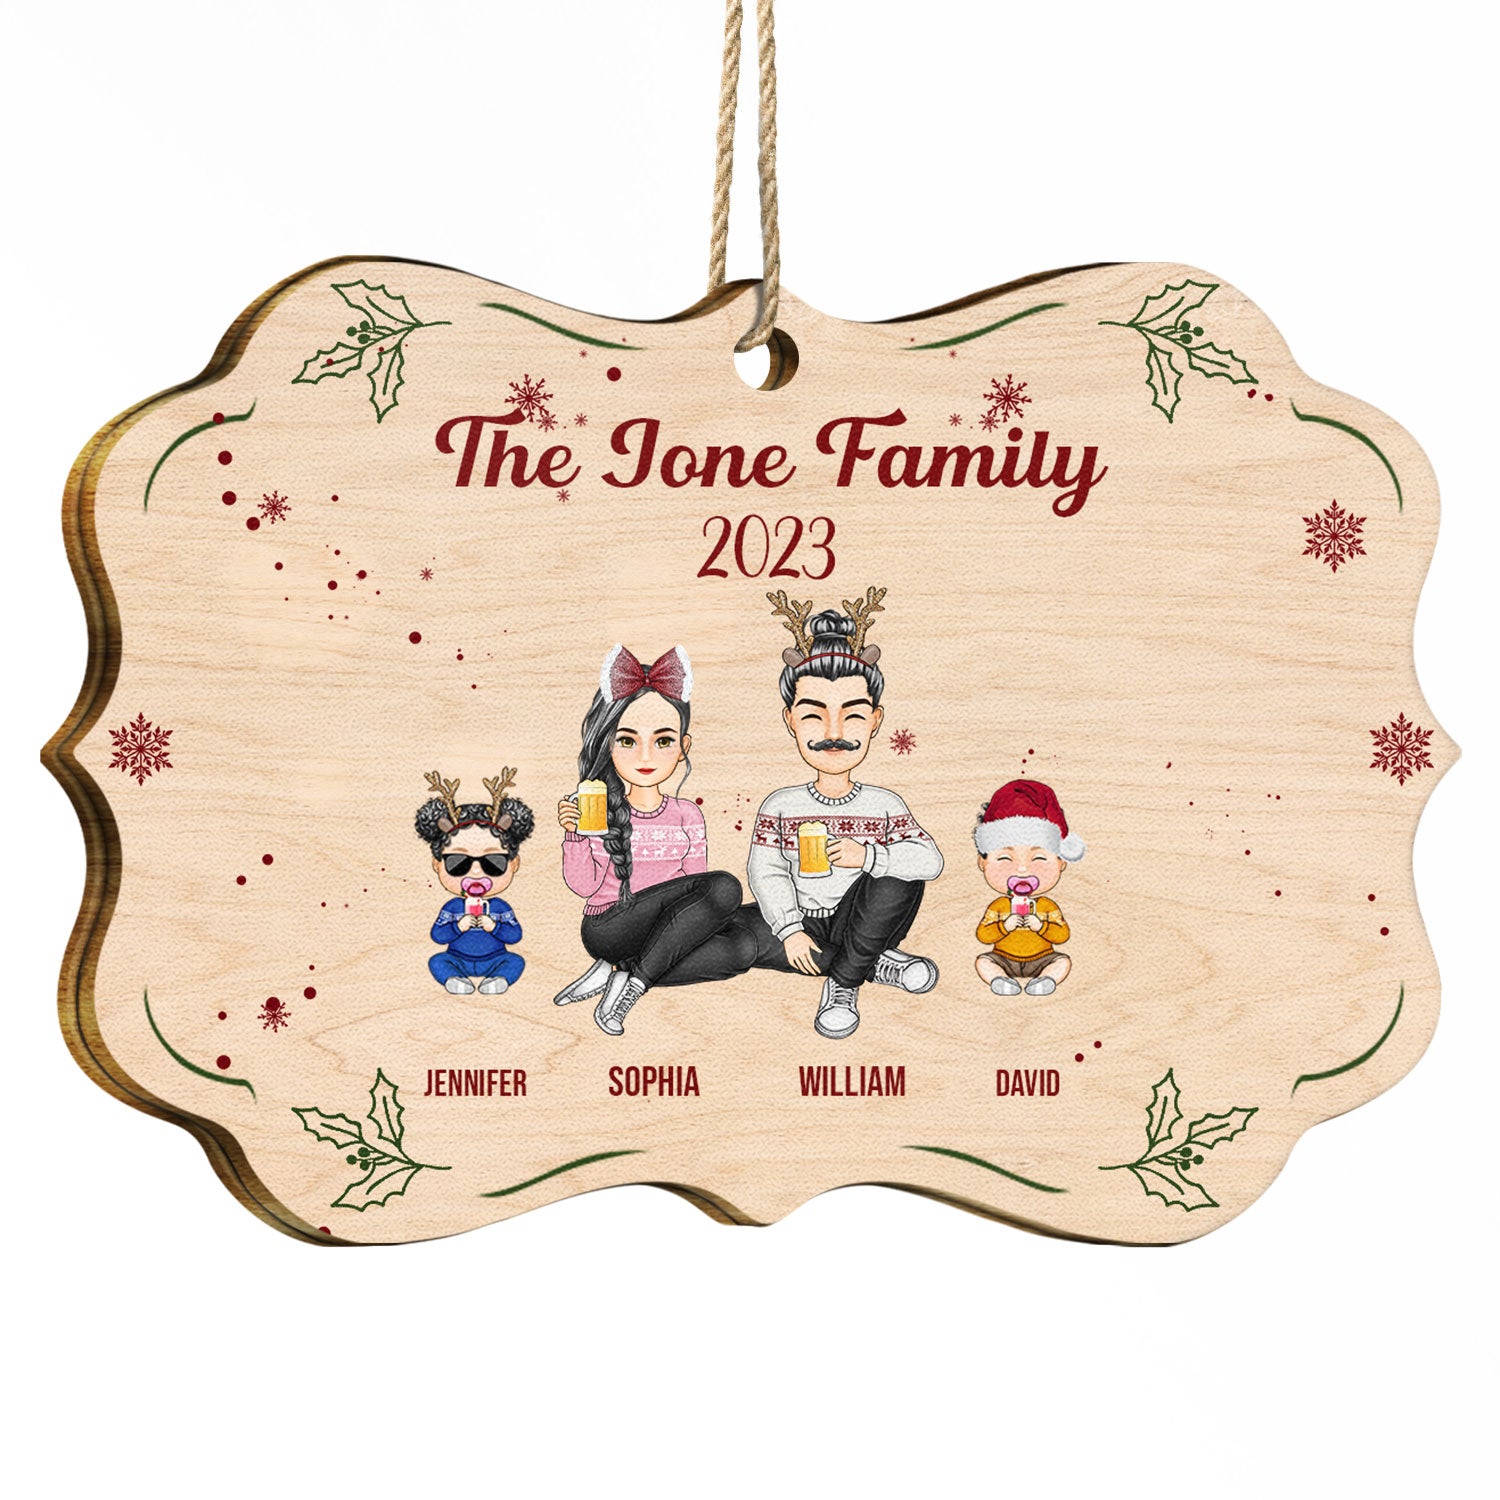 The Family 2023 - Christmas Gift For Family - Personalized Medallion Wooden Ornament